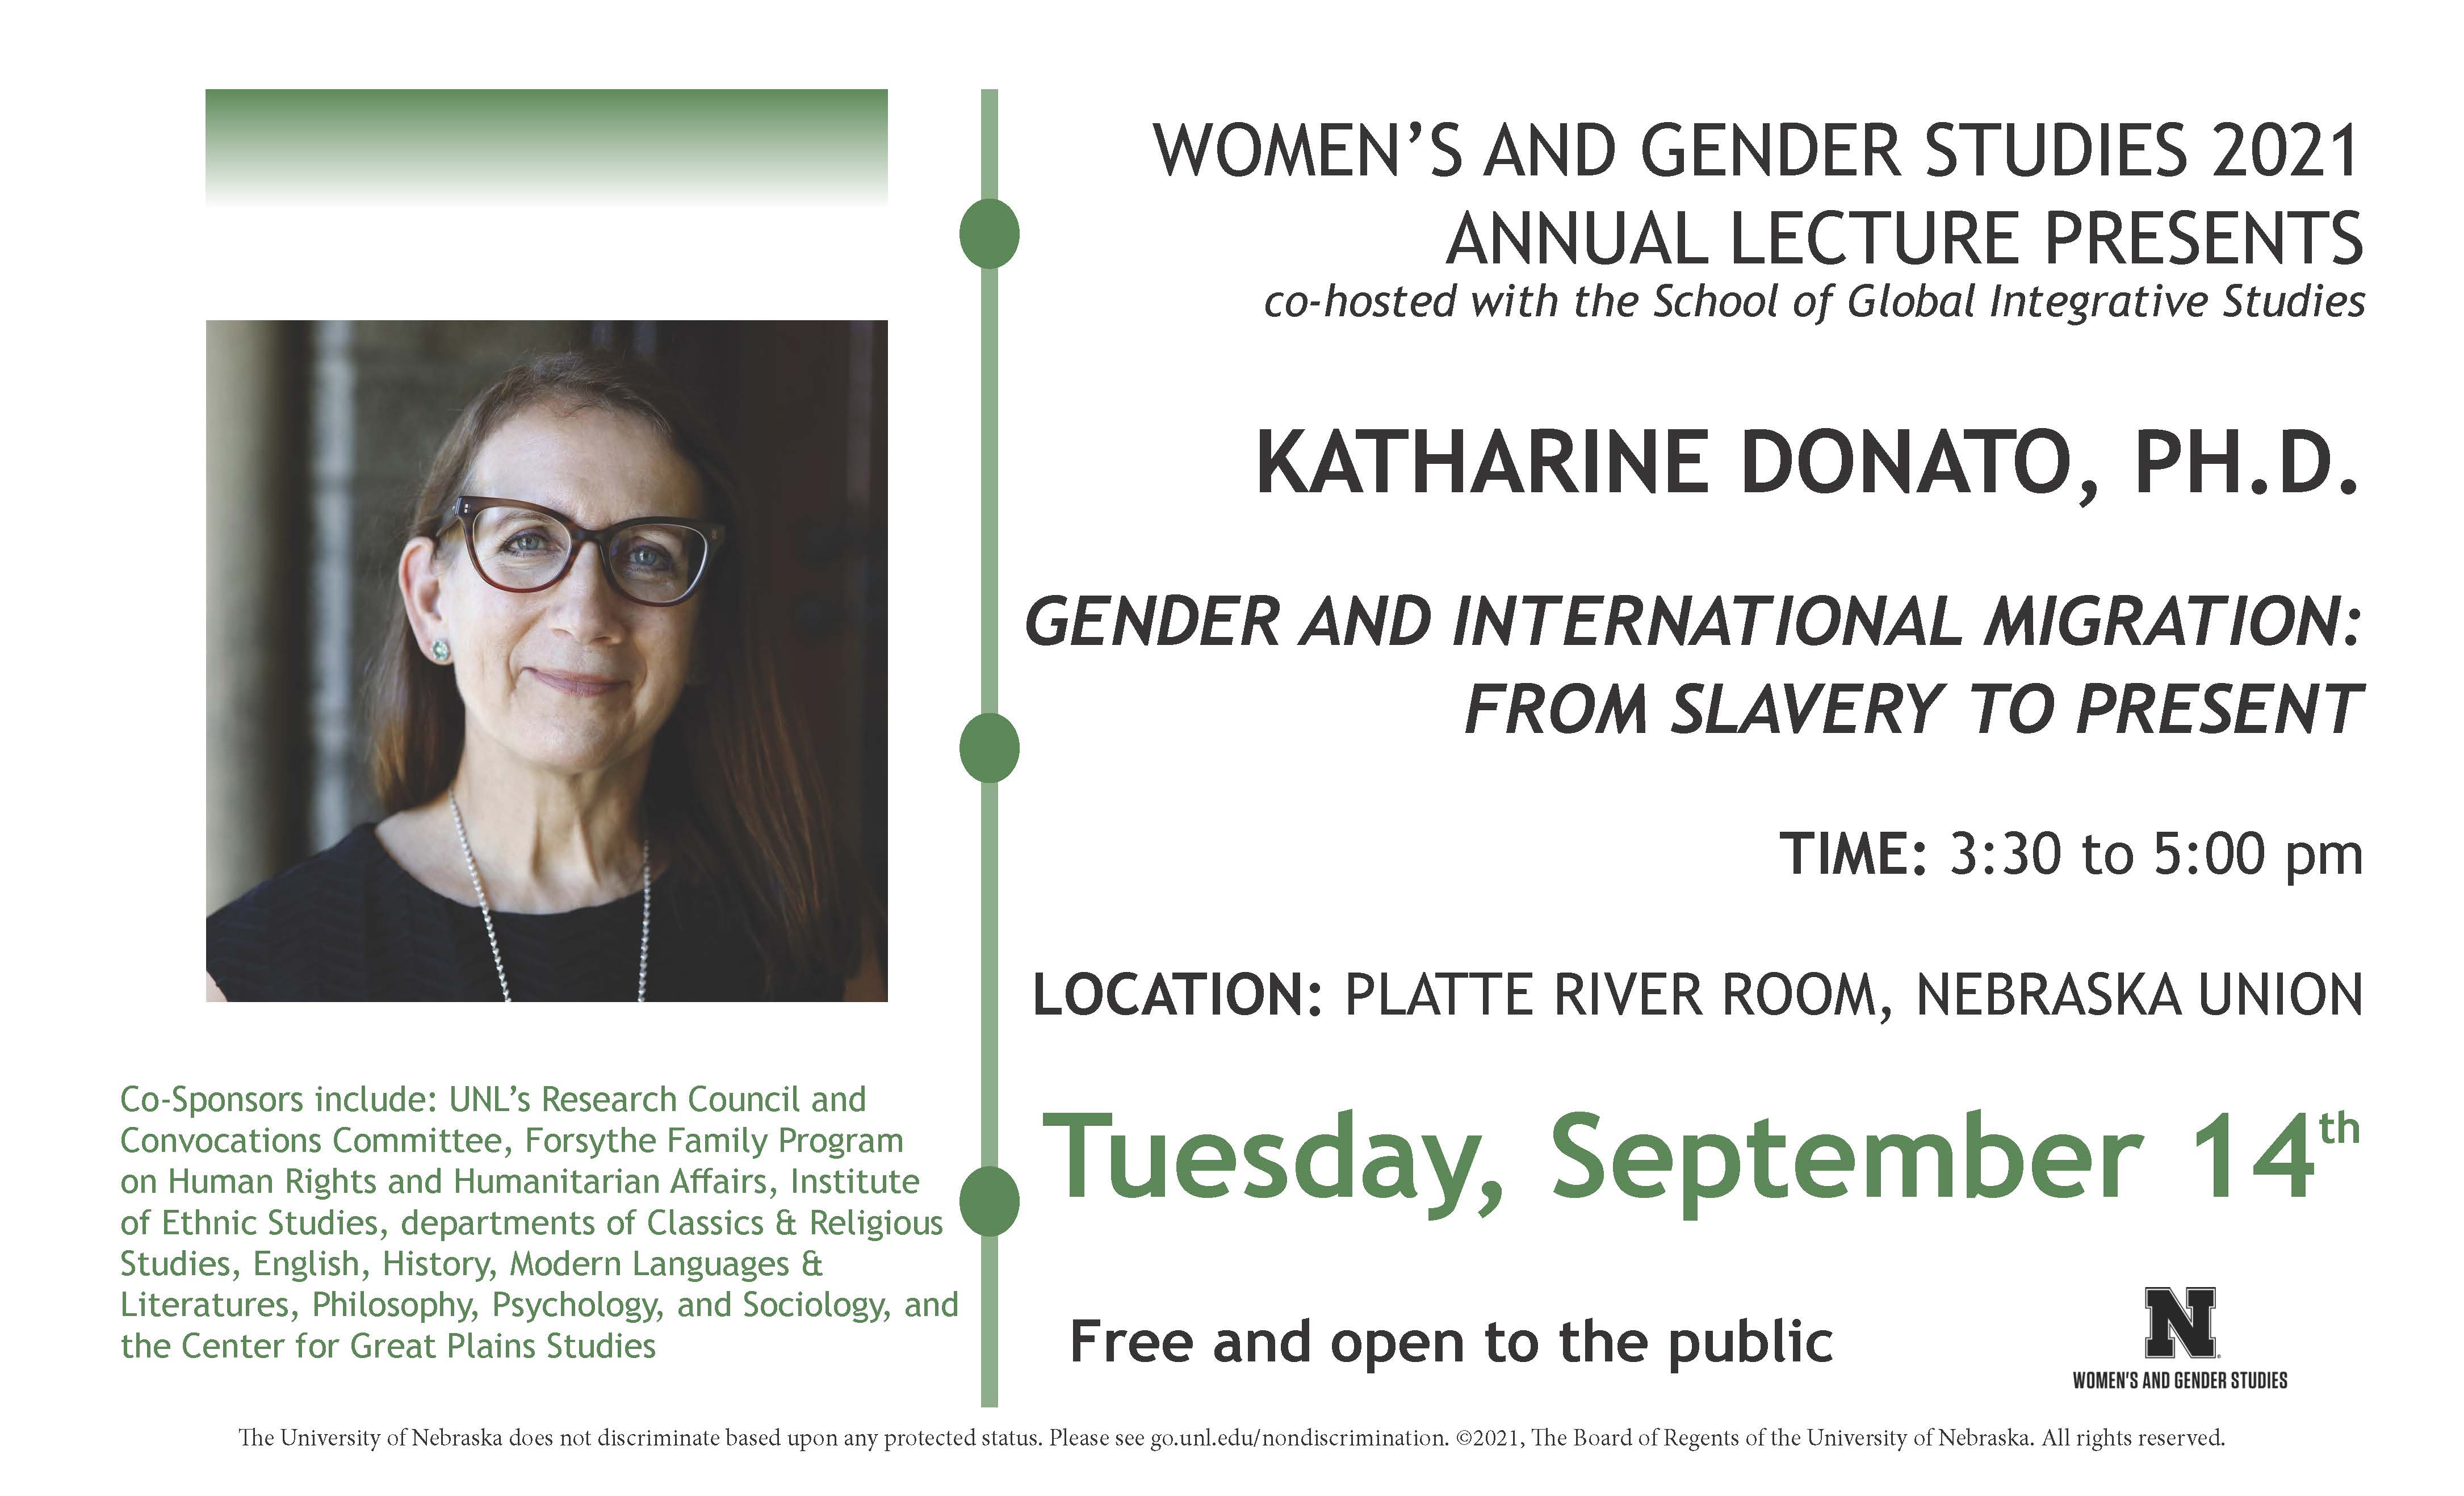 Donato to give WGS annual lecture Sept. 14